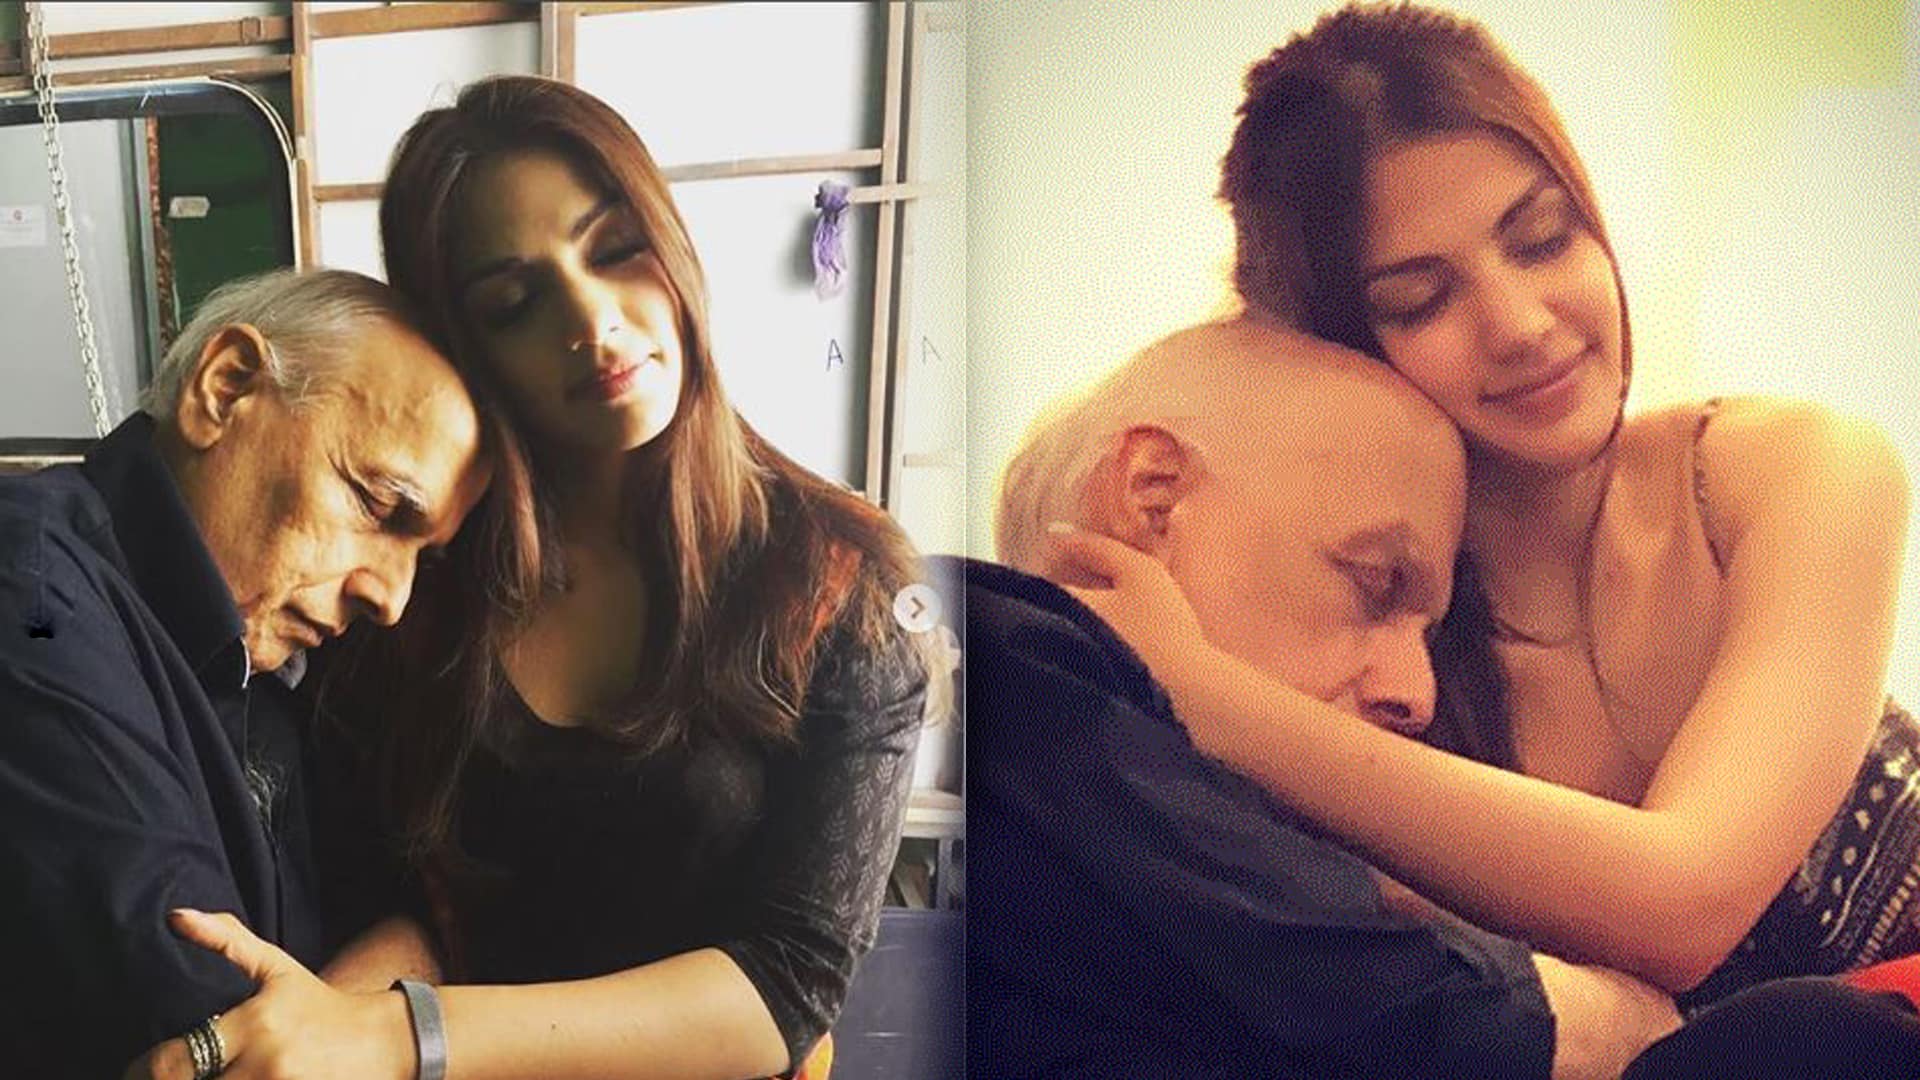 rhea trolled aftar upload her pictures with mahesh bhatt on social media